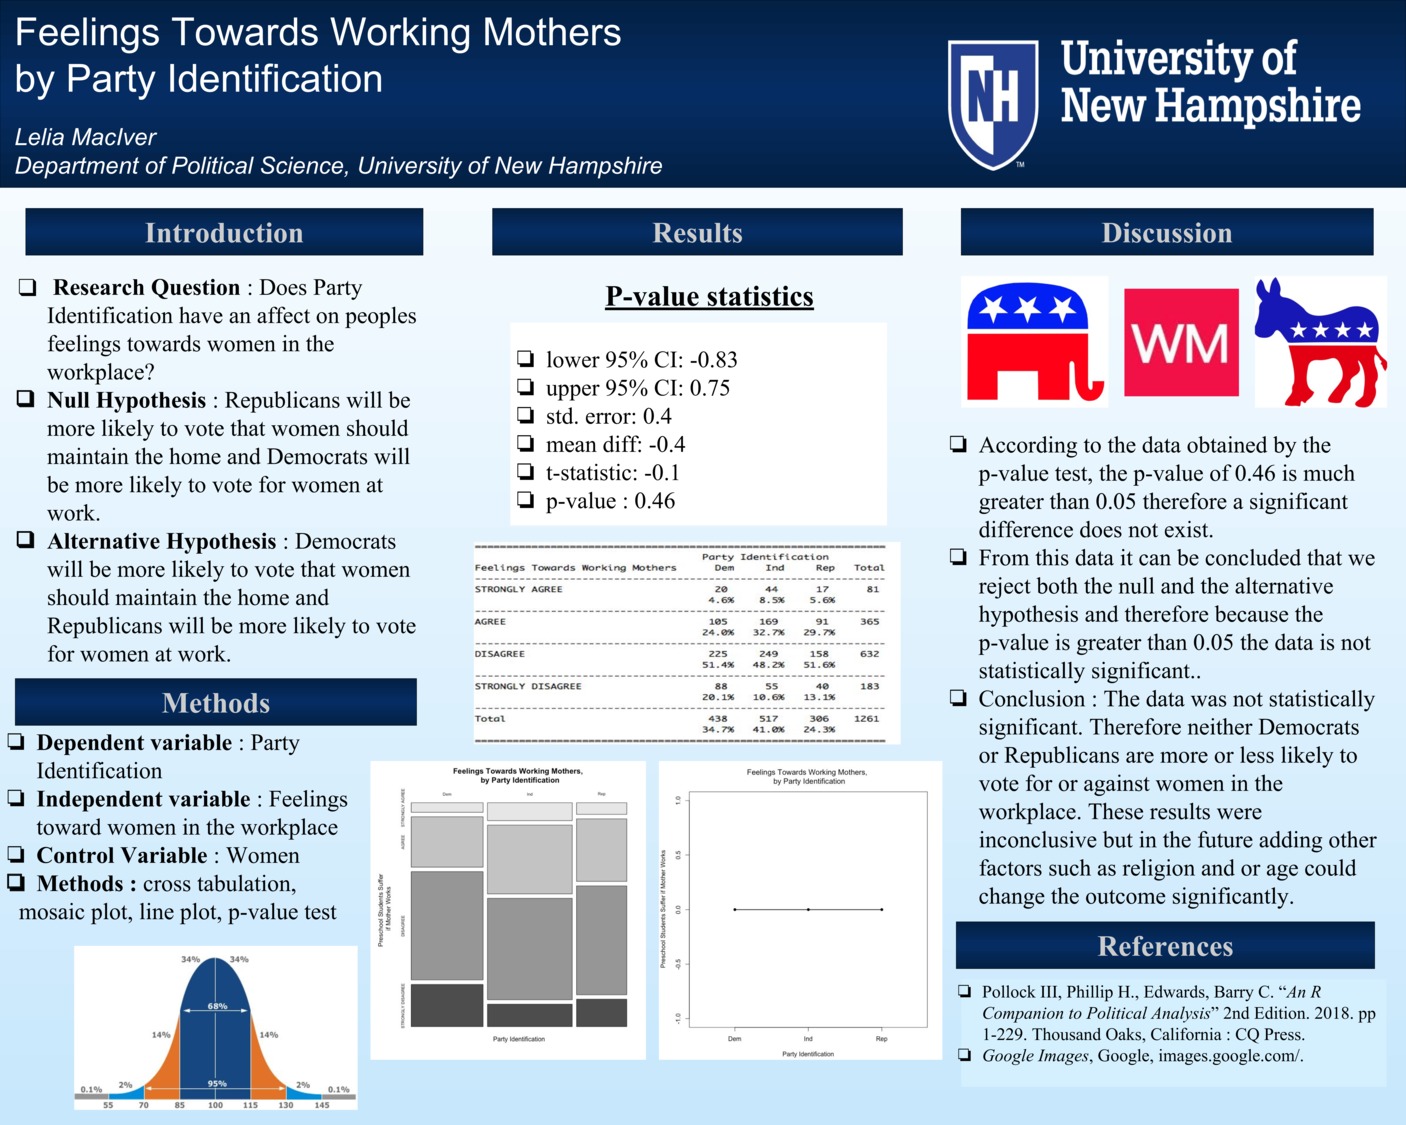 Feelings Towards Working Mothers By Party Identification by lpm1001